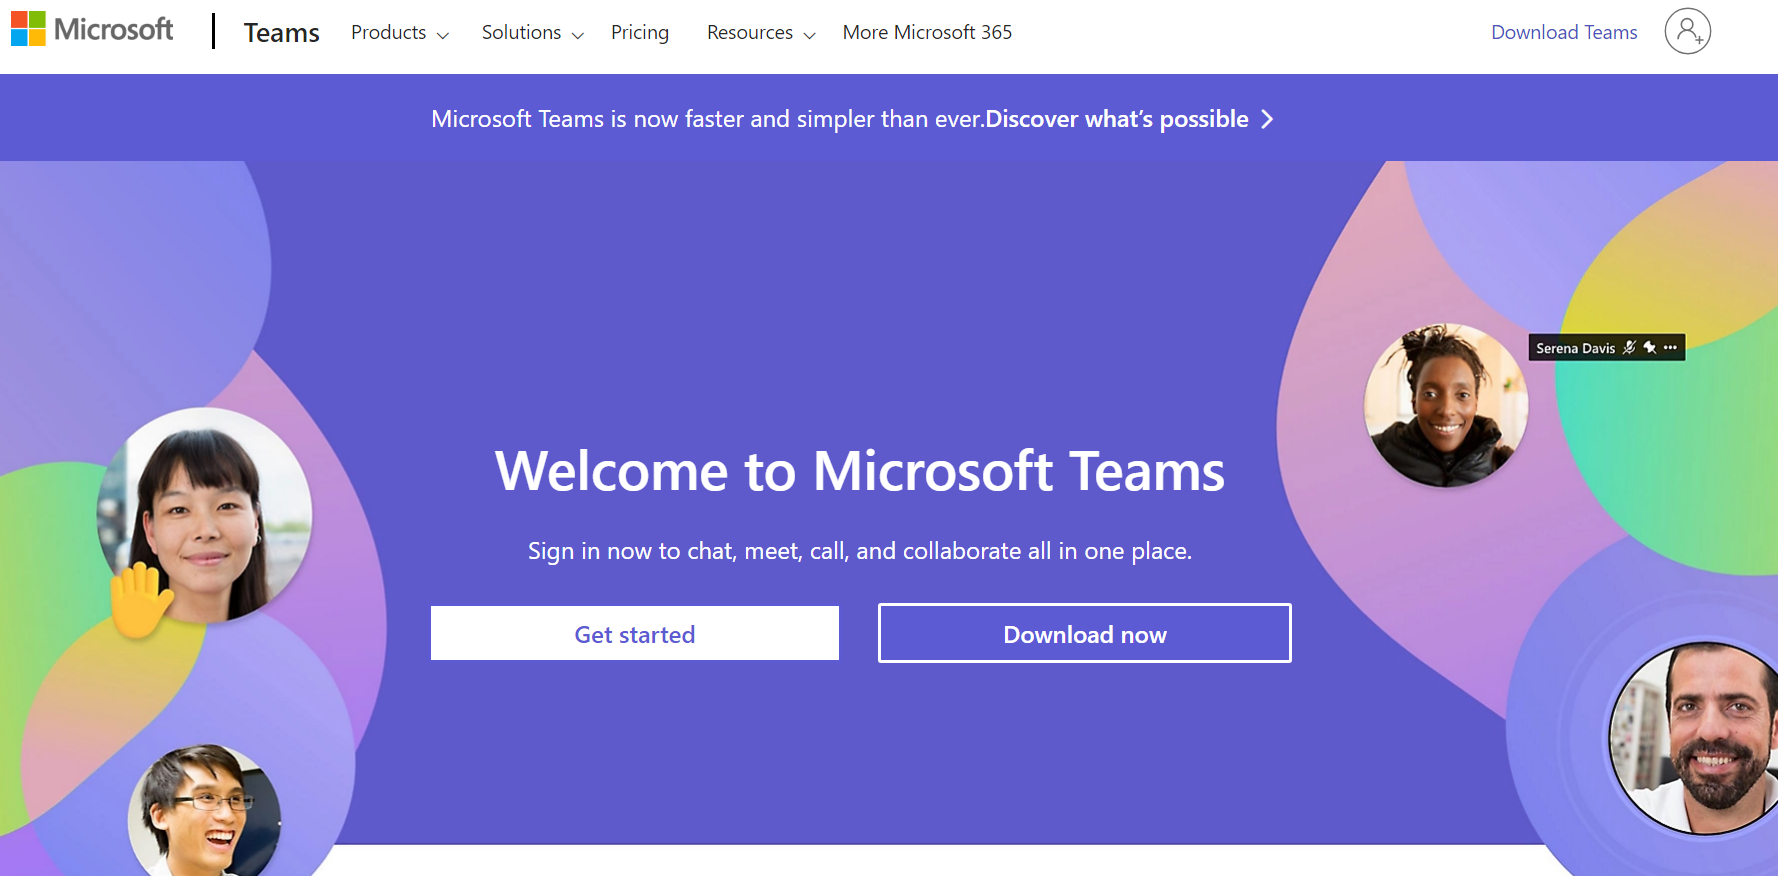 Microsoft Teams for conference calls